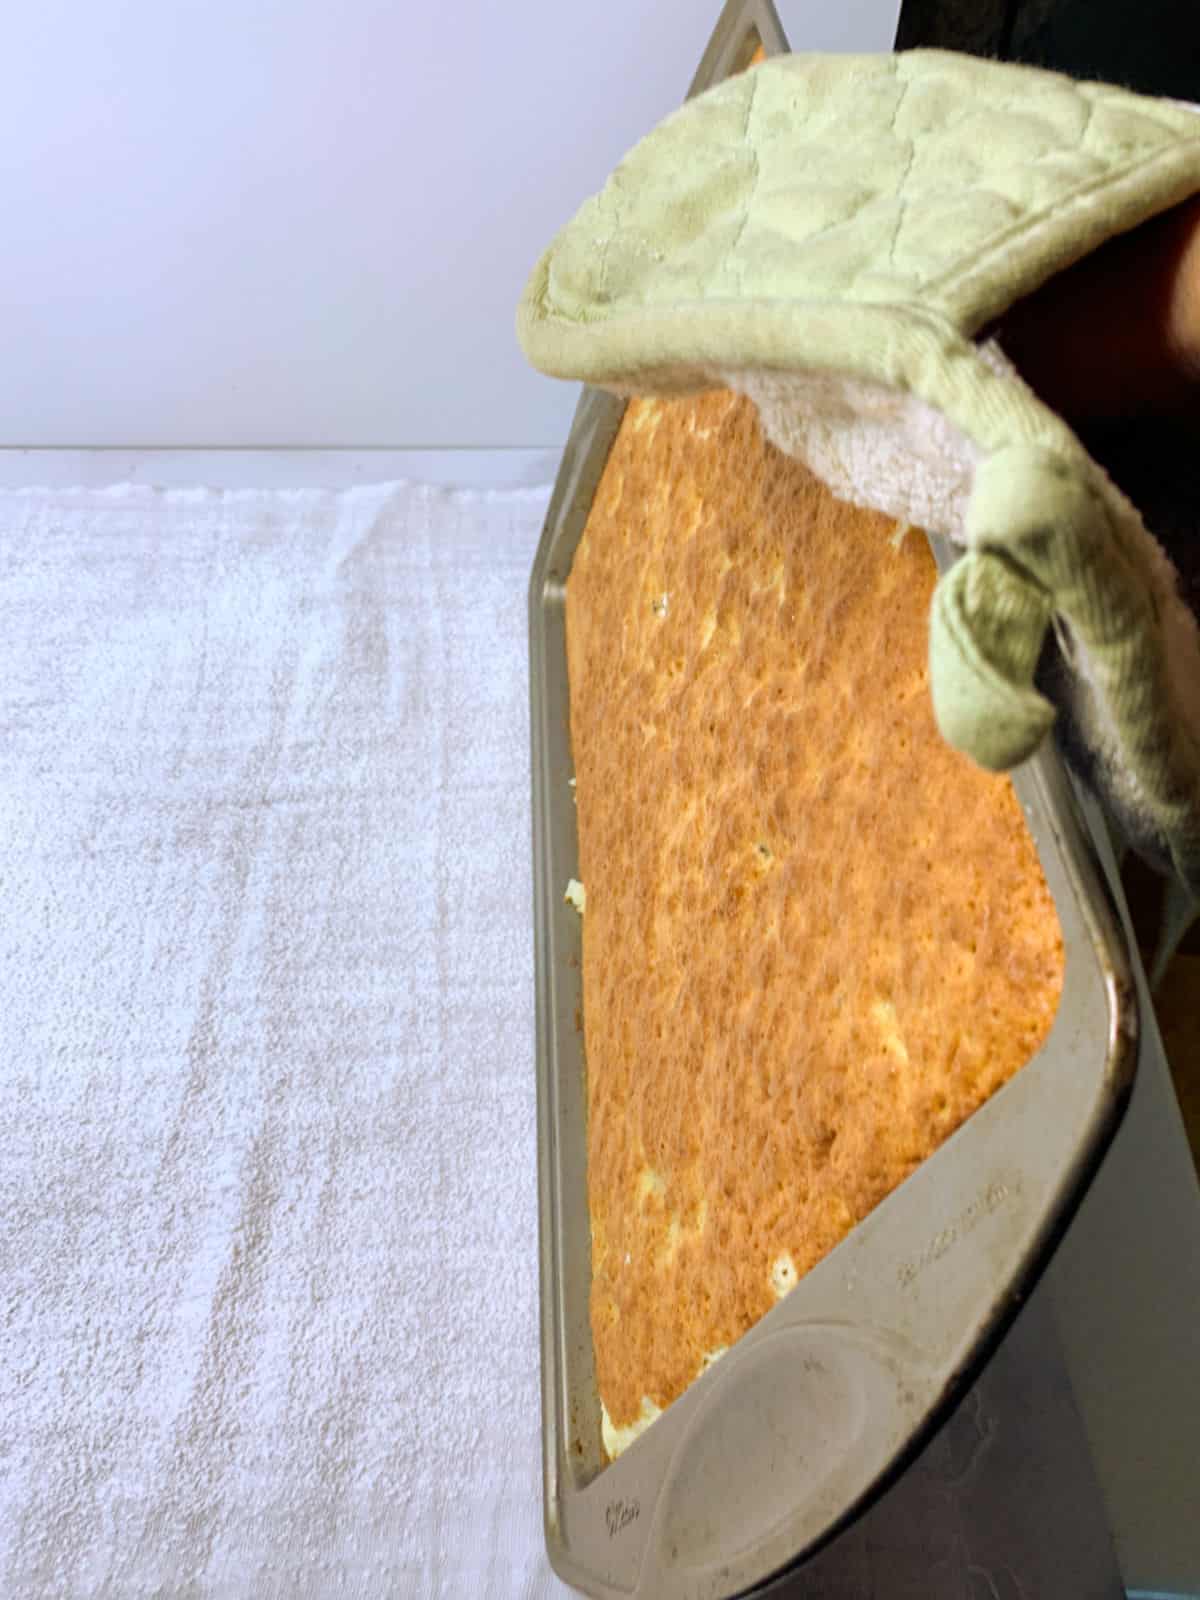 Flipping a cake out of the pan onto a towel.